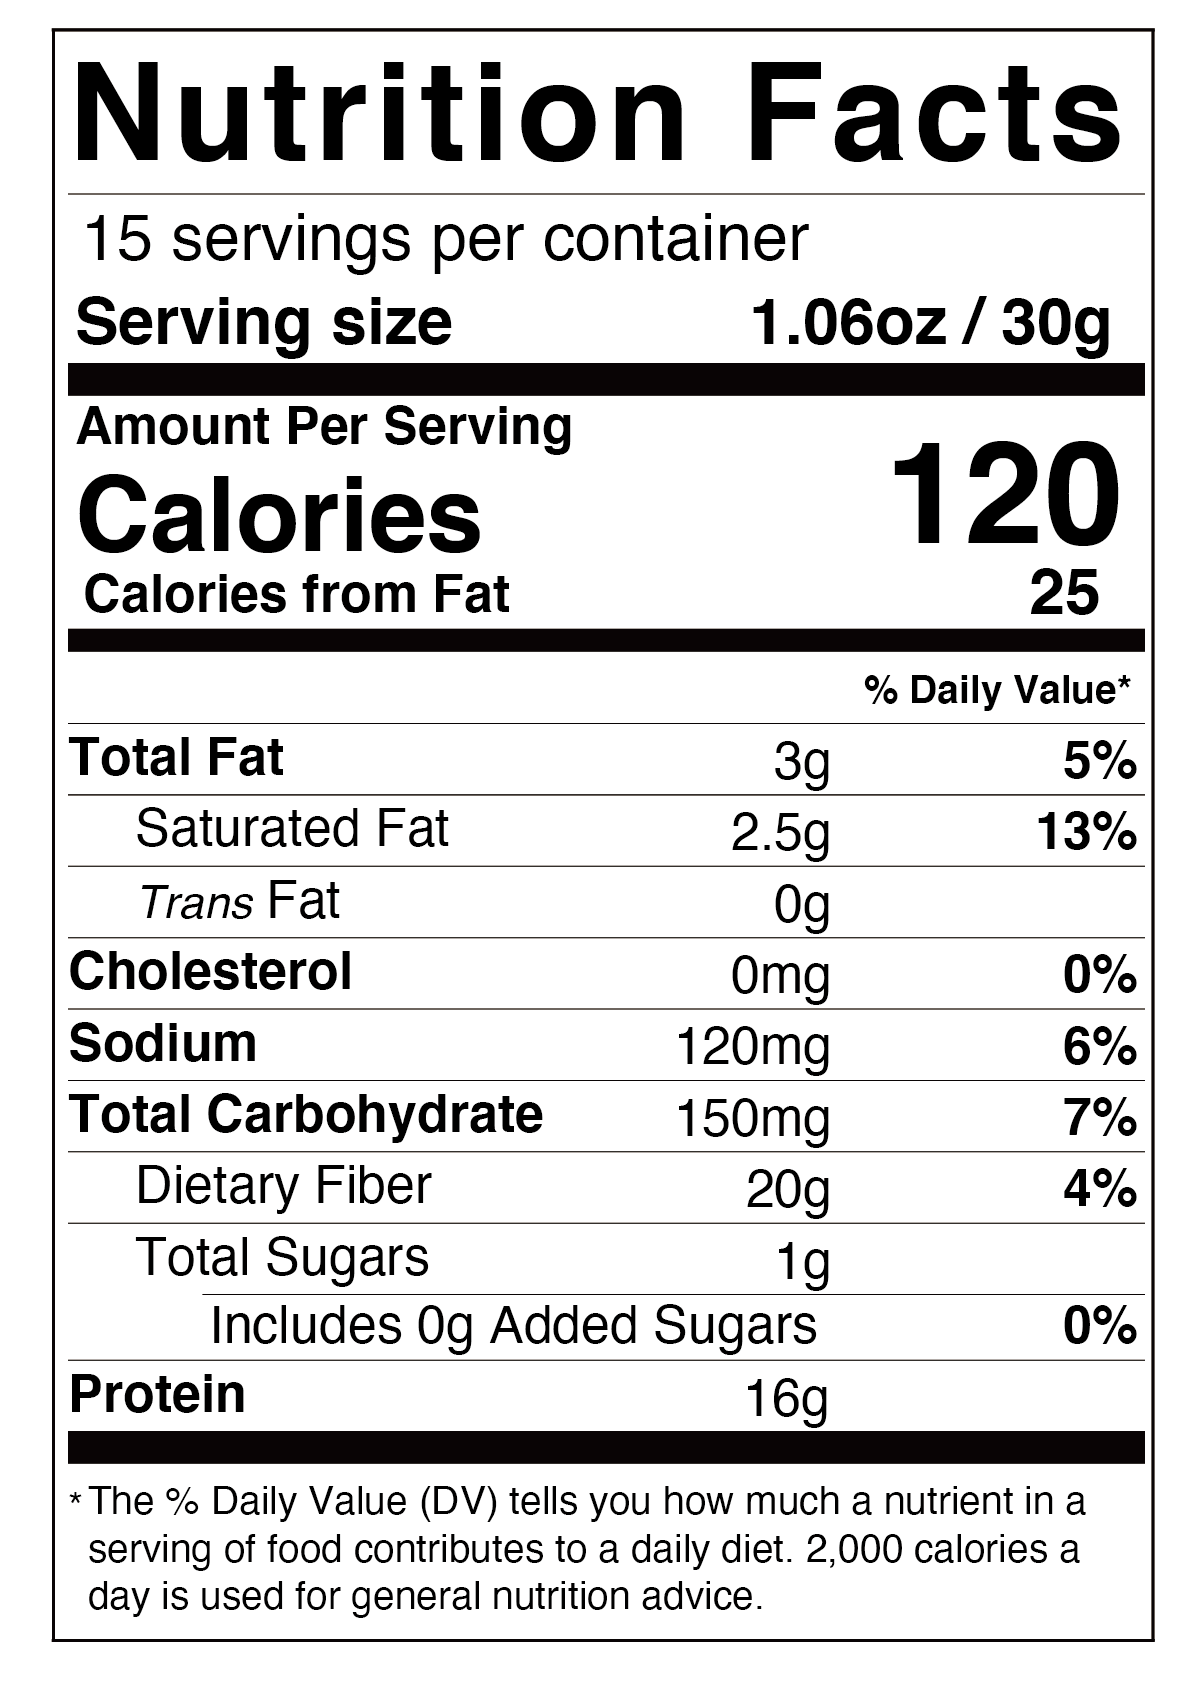 Divine Cereal nutrition facts